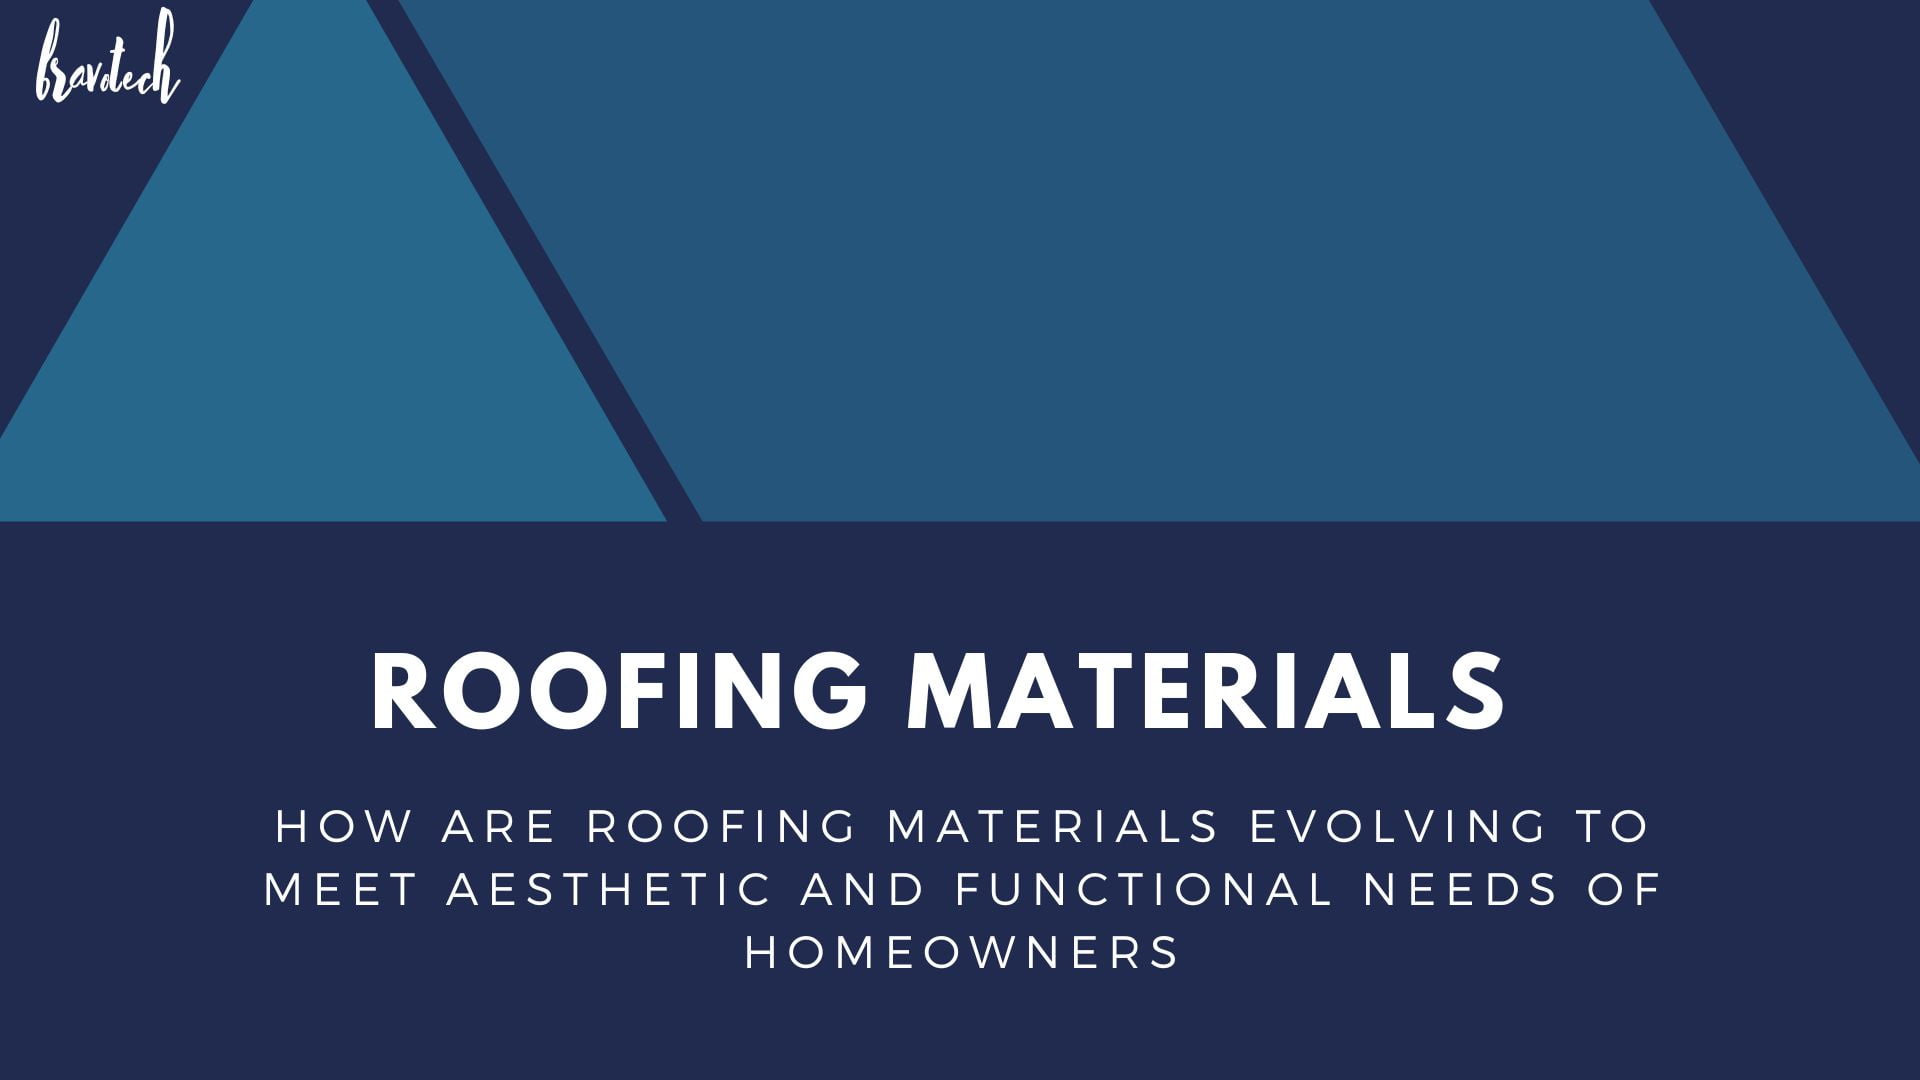 How Do Roofing Materials Meet Homeowners Needs?